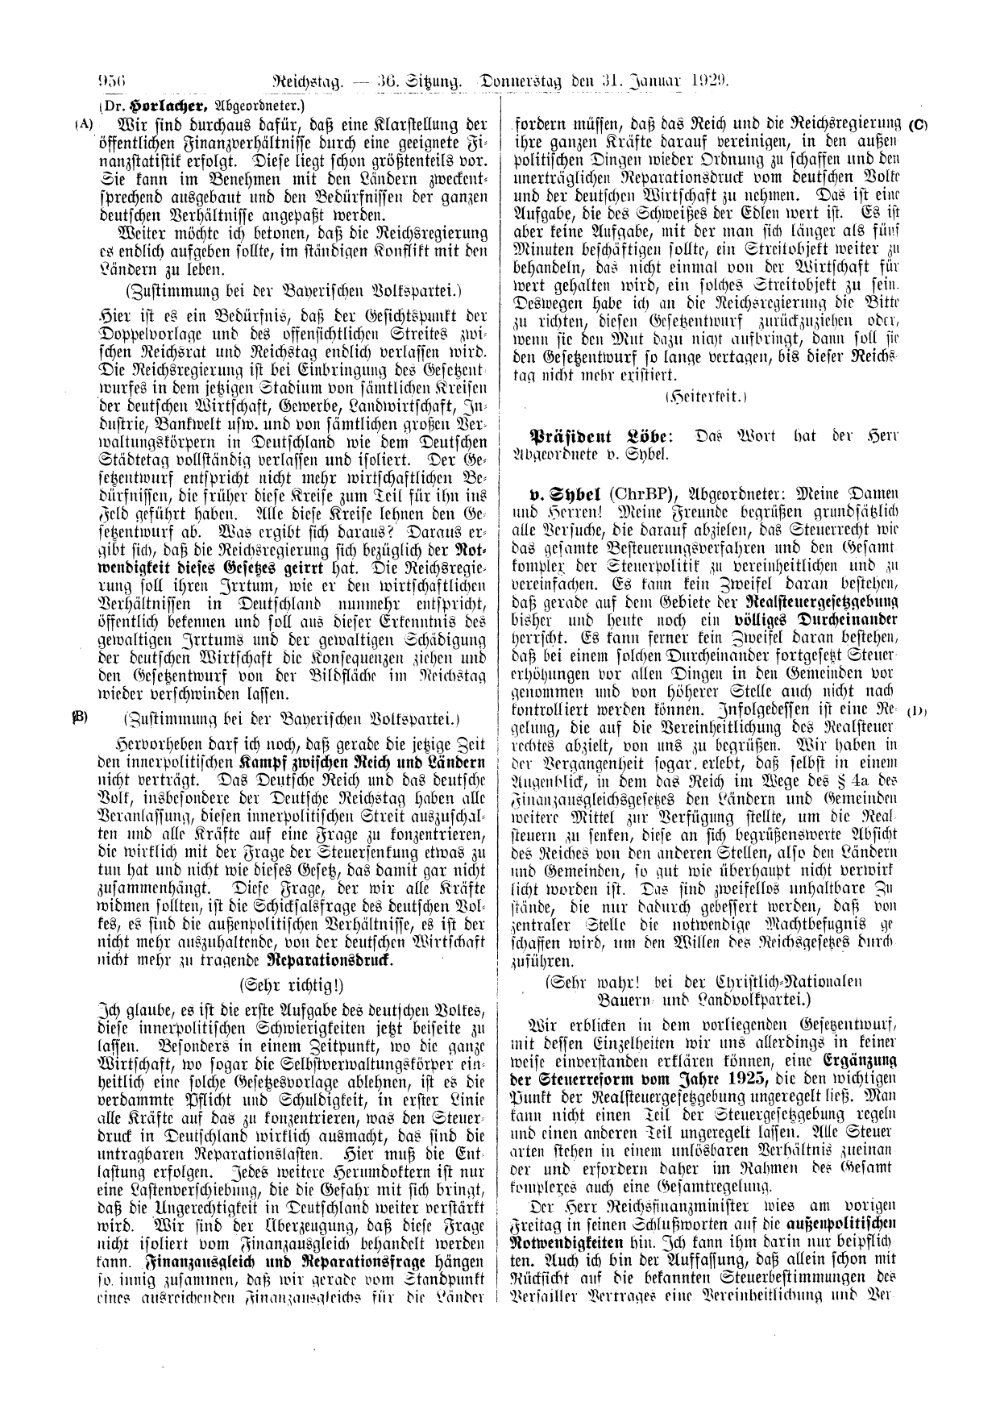 Scan of page 956